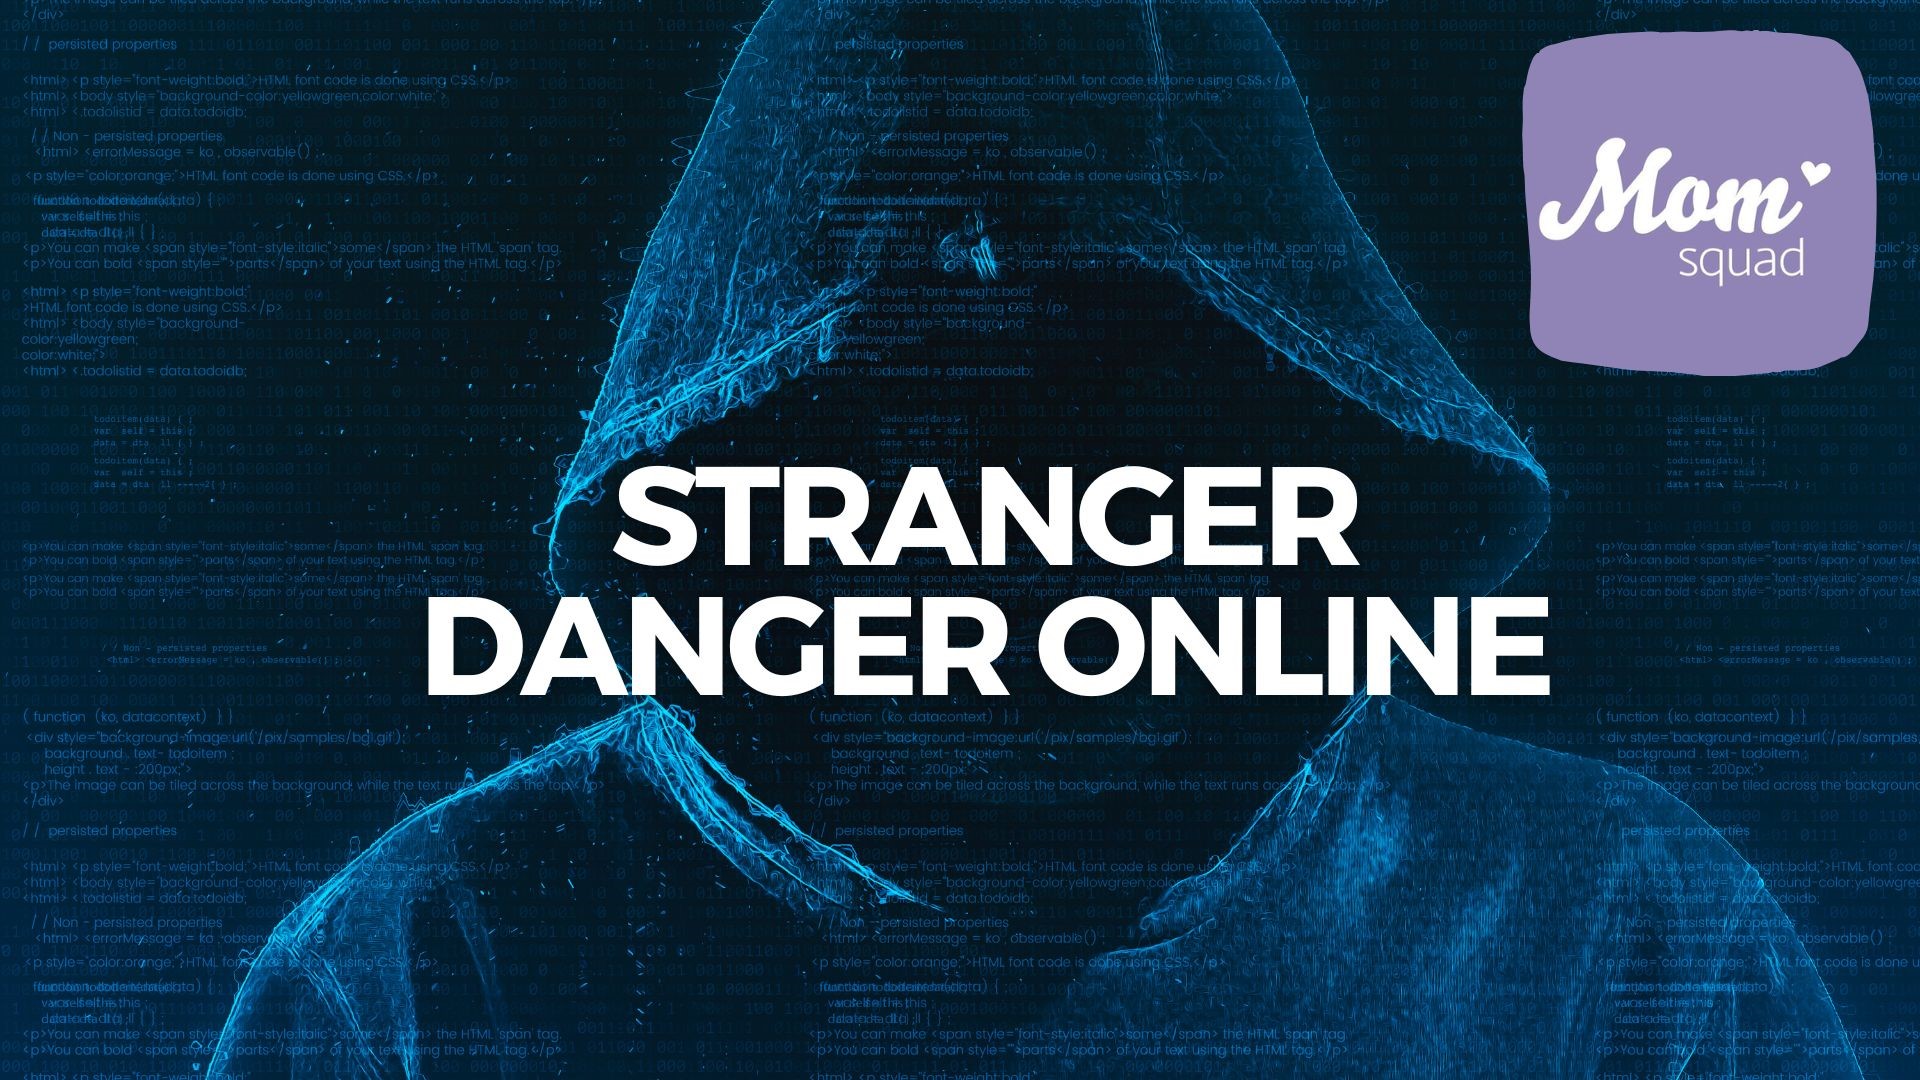 WKYC's Maureen Kyle speaks with an FBI special agent on what parents need to know when it comes to protecting their kids from strangers online and in-person threats.